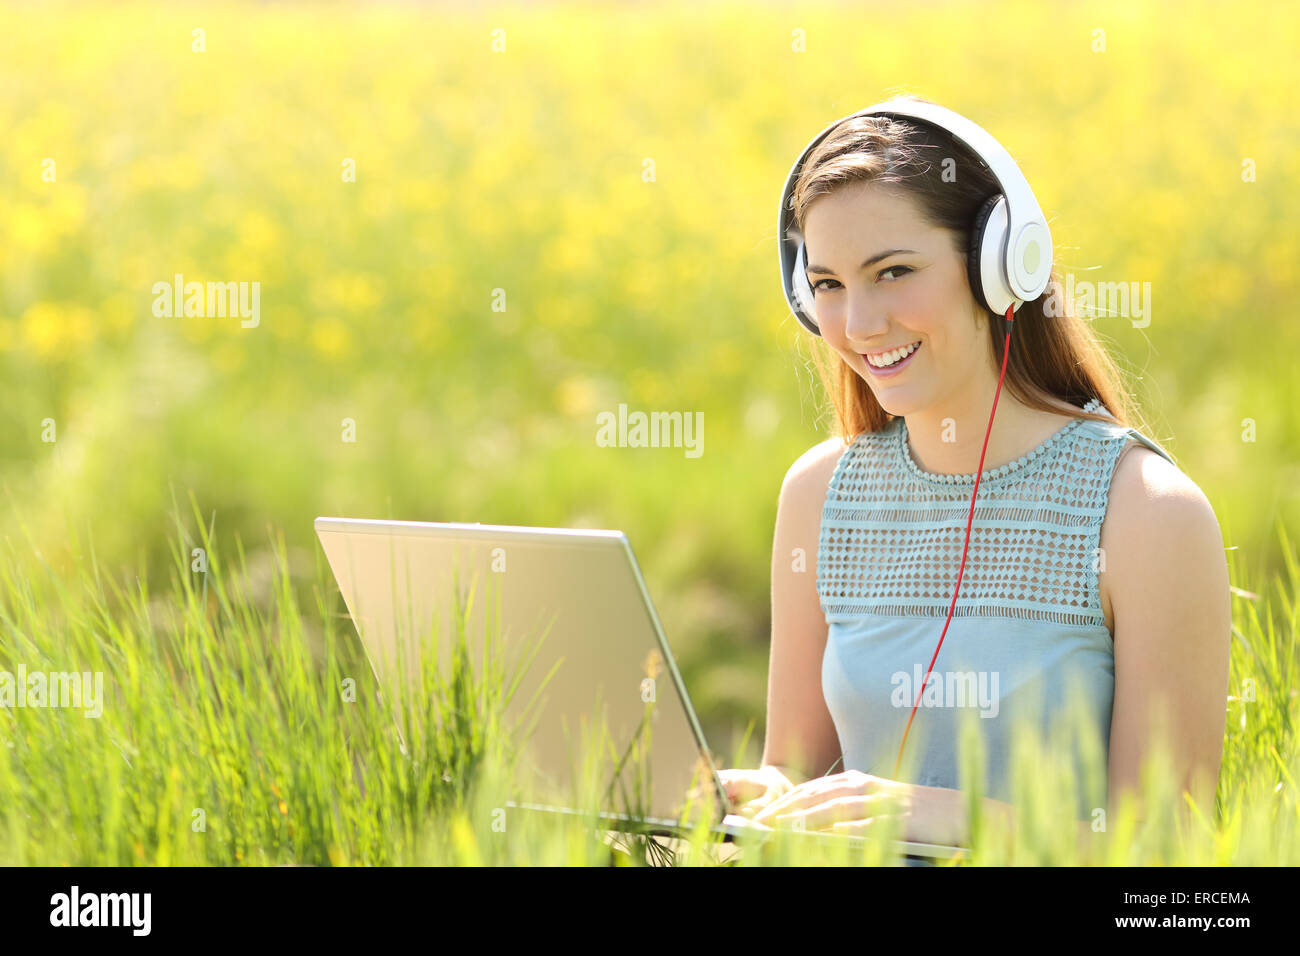 Woman working with a laptop and headphones in a field looking at camera Stock Photo